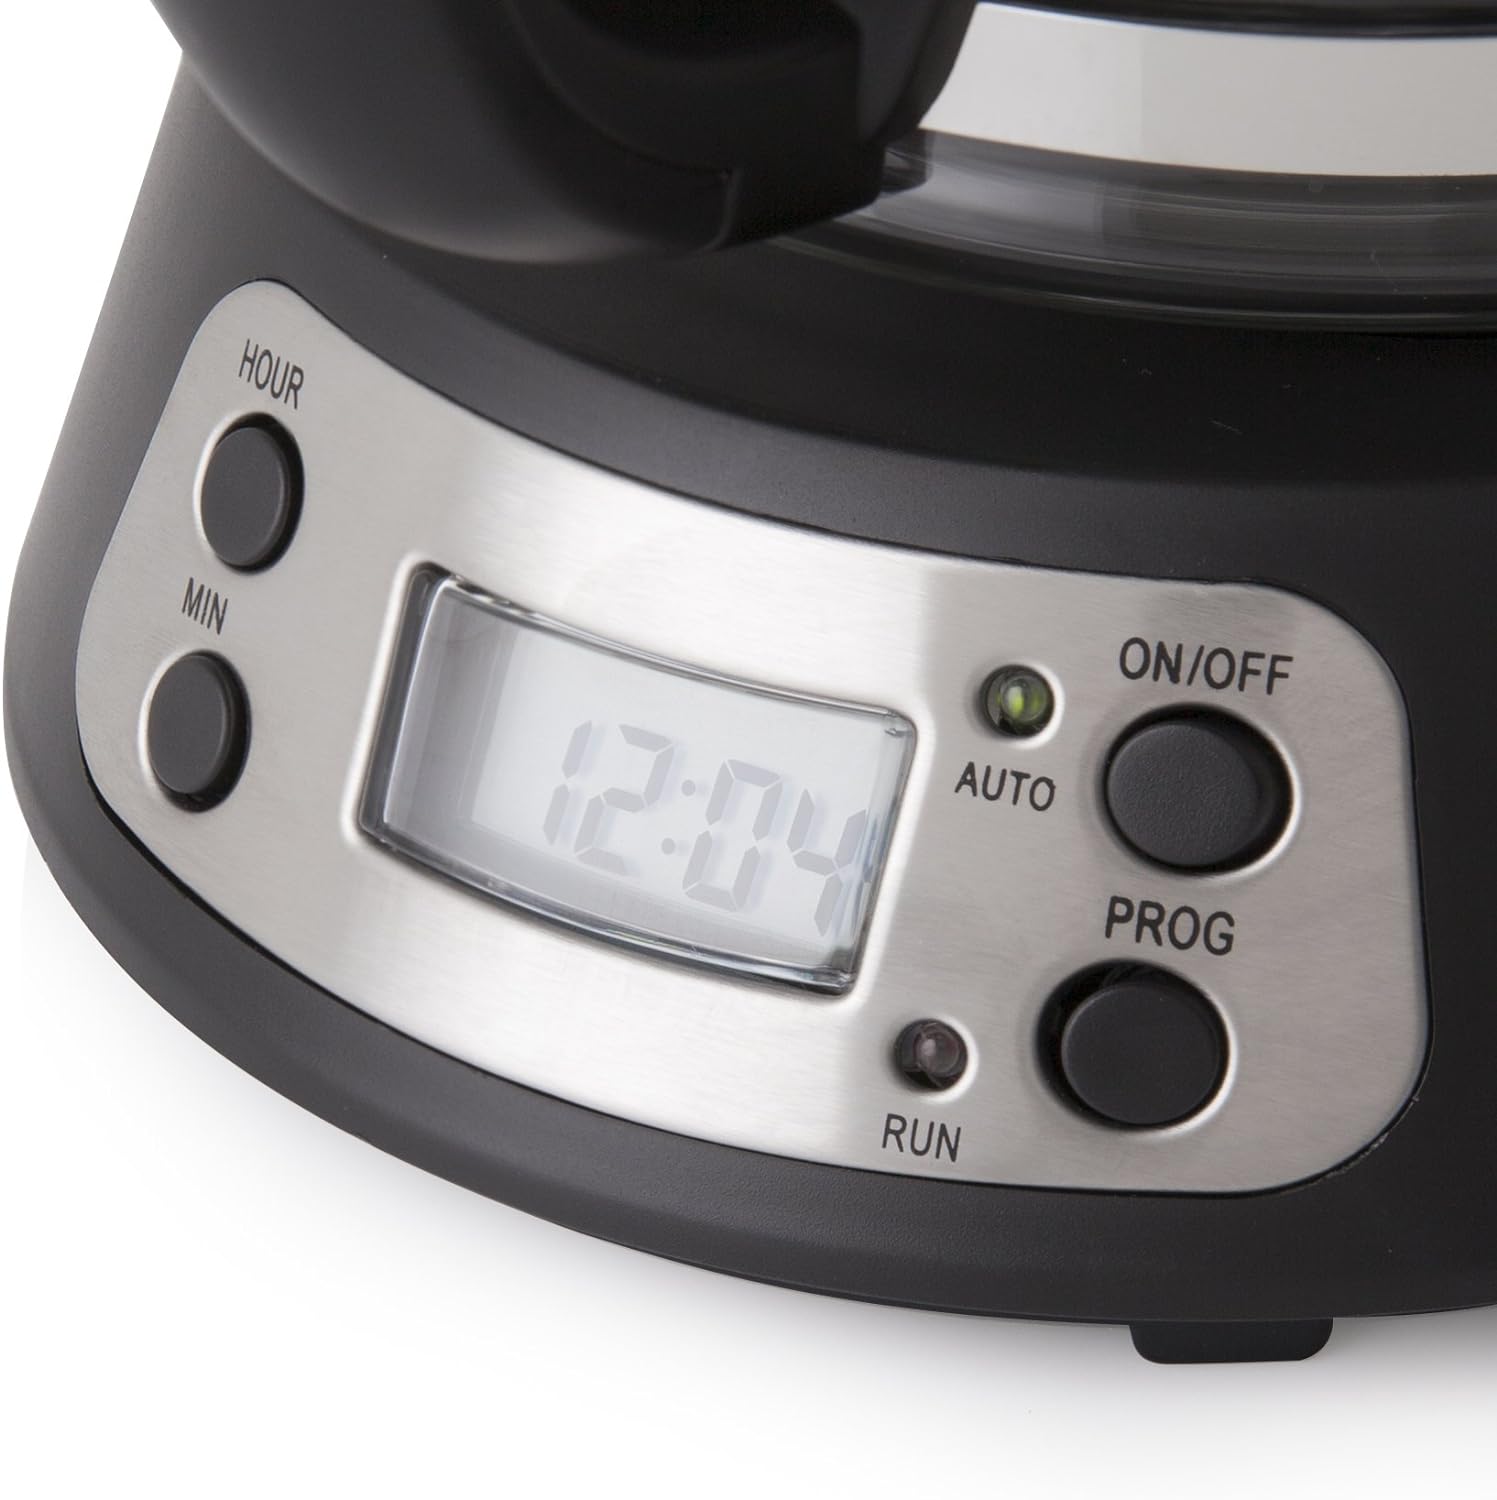 Swan SK13130N Programmable Coffee Maker with Keep Warm Function, LCD Timer, 750ml, 700W, Black - Amazing Gadgets Outlet